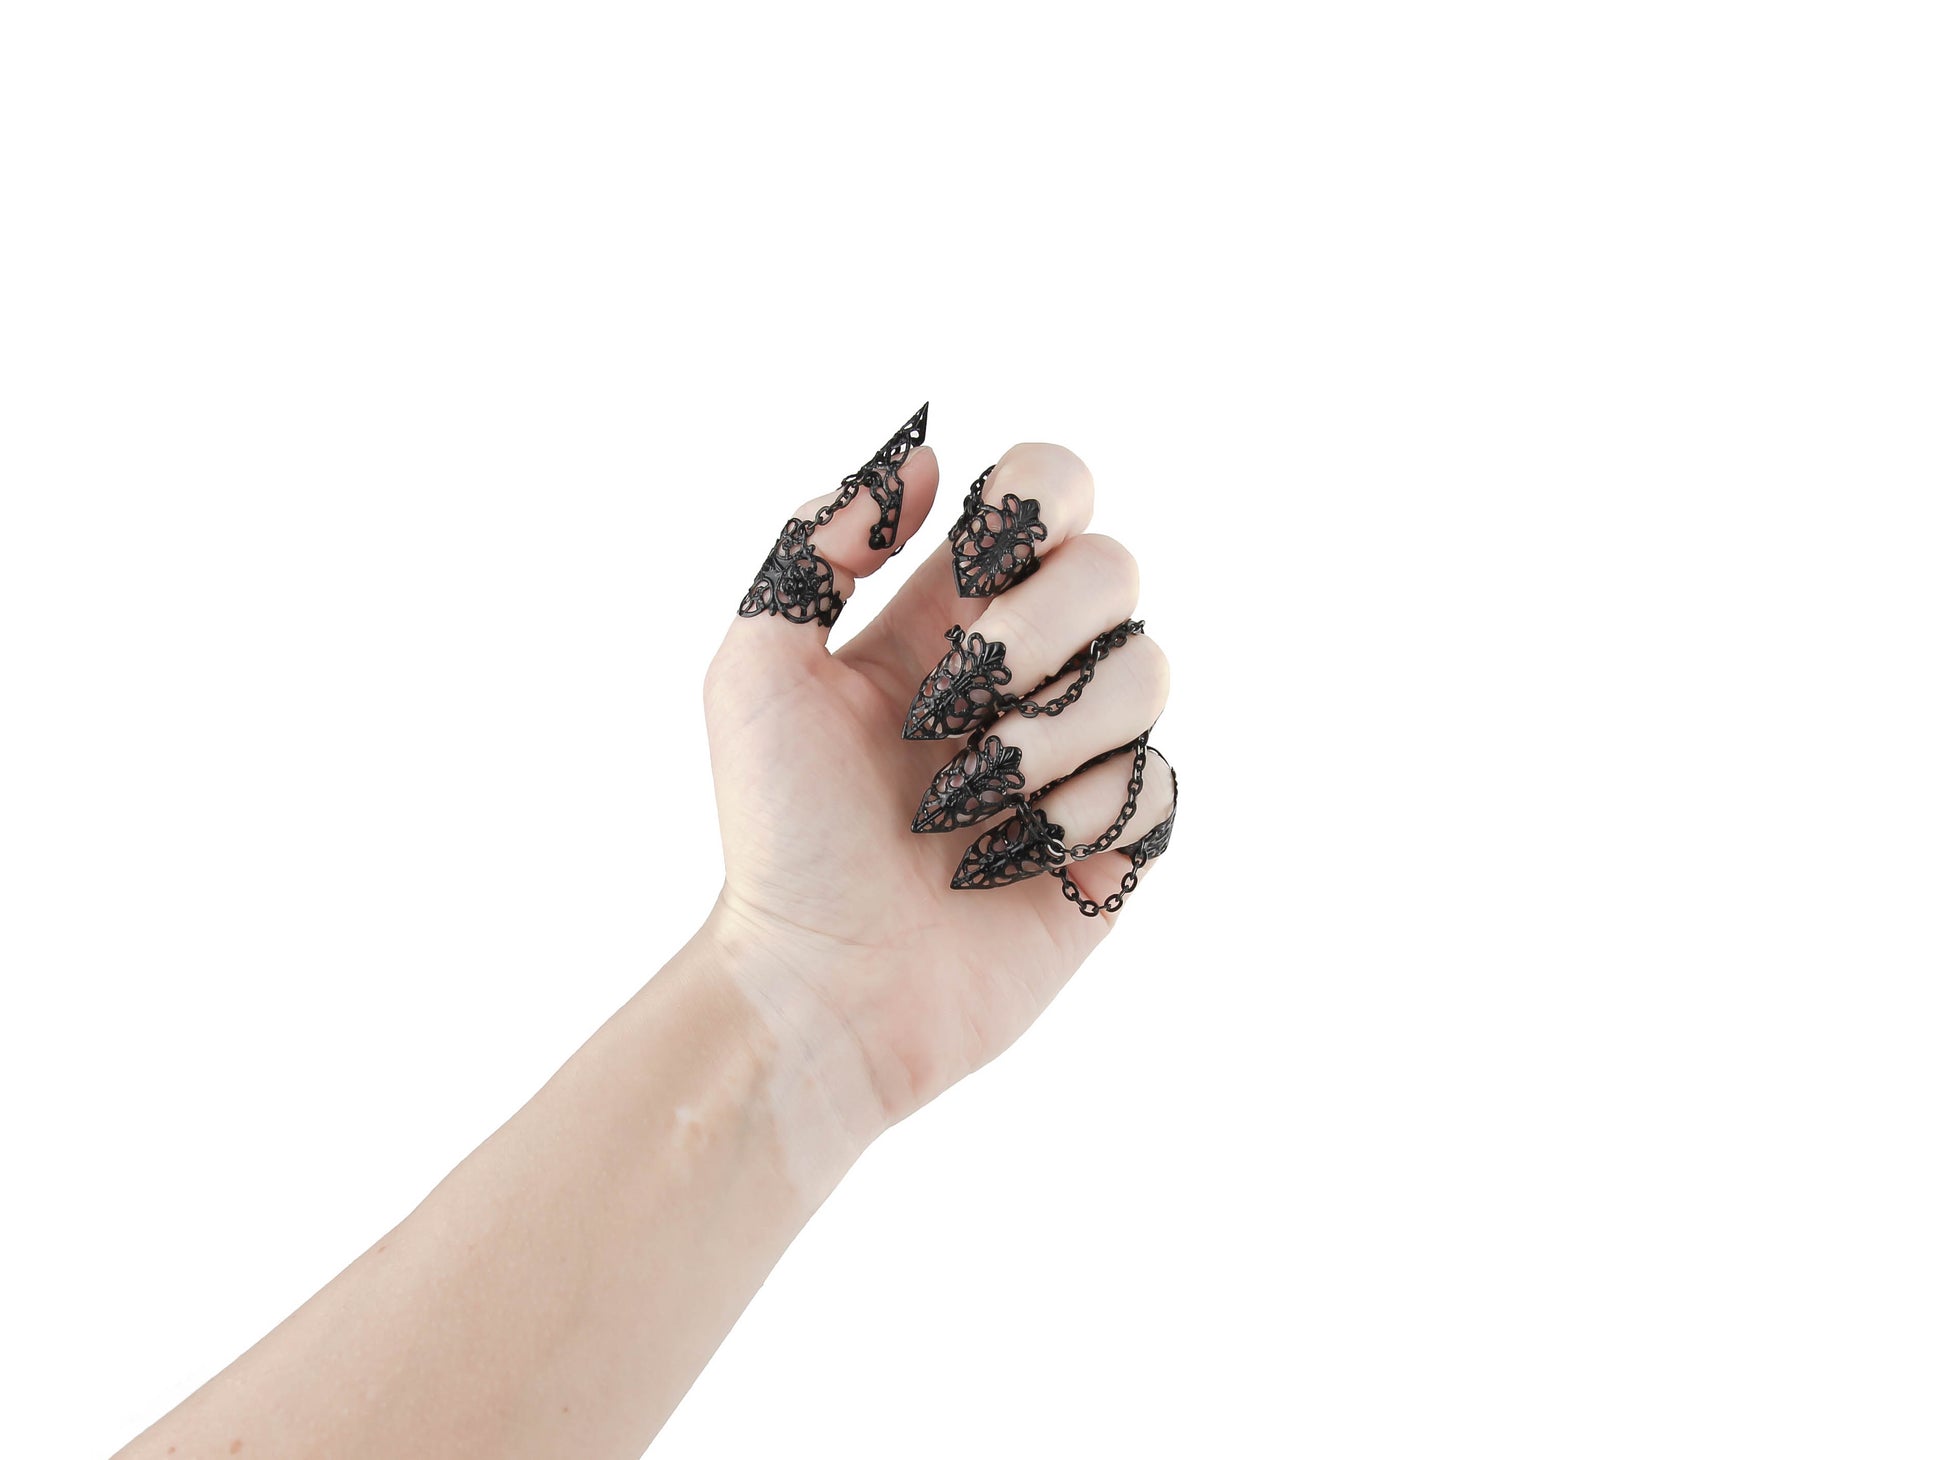 A hand is elegantly displayed, adorned with Myril Jewels' full set of ornate black rings with nail claws. These neo-goth pieces are the quintessence of gothic-chic, designed for those who favor dark, avant-garde jewelry, suitable for Halloween, festival wear, or as a striking everyday accessory